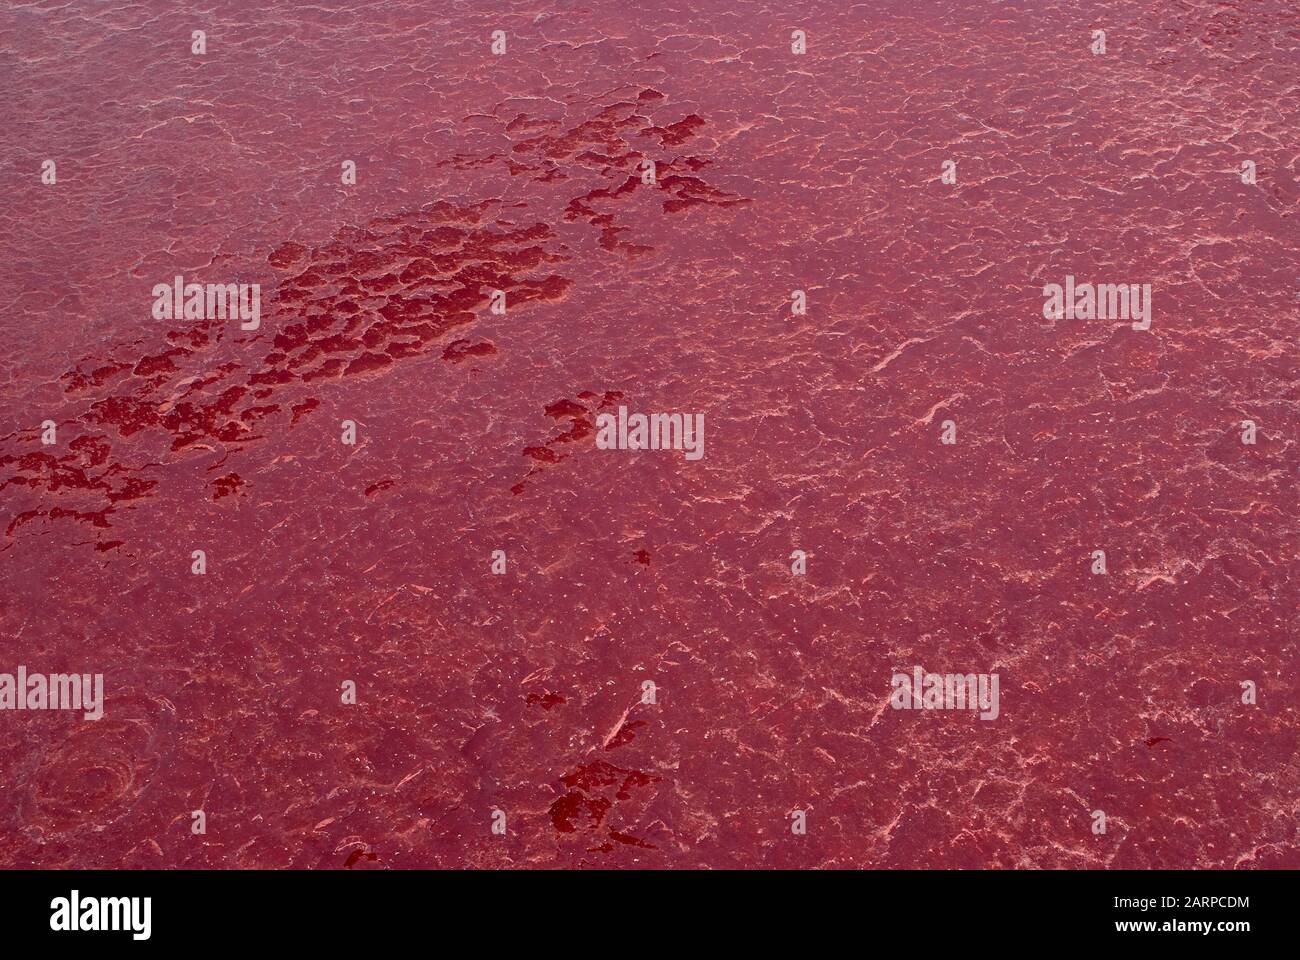 Photosynthesising pigments of the blue-green bacteria cyanobacteria turns Lake Natron into amazing red colour (aerial view) Stock Photo